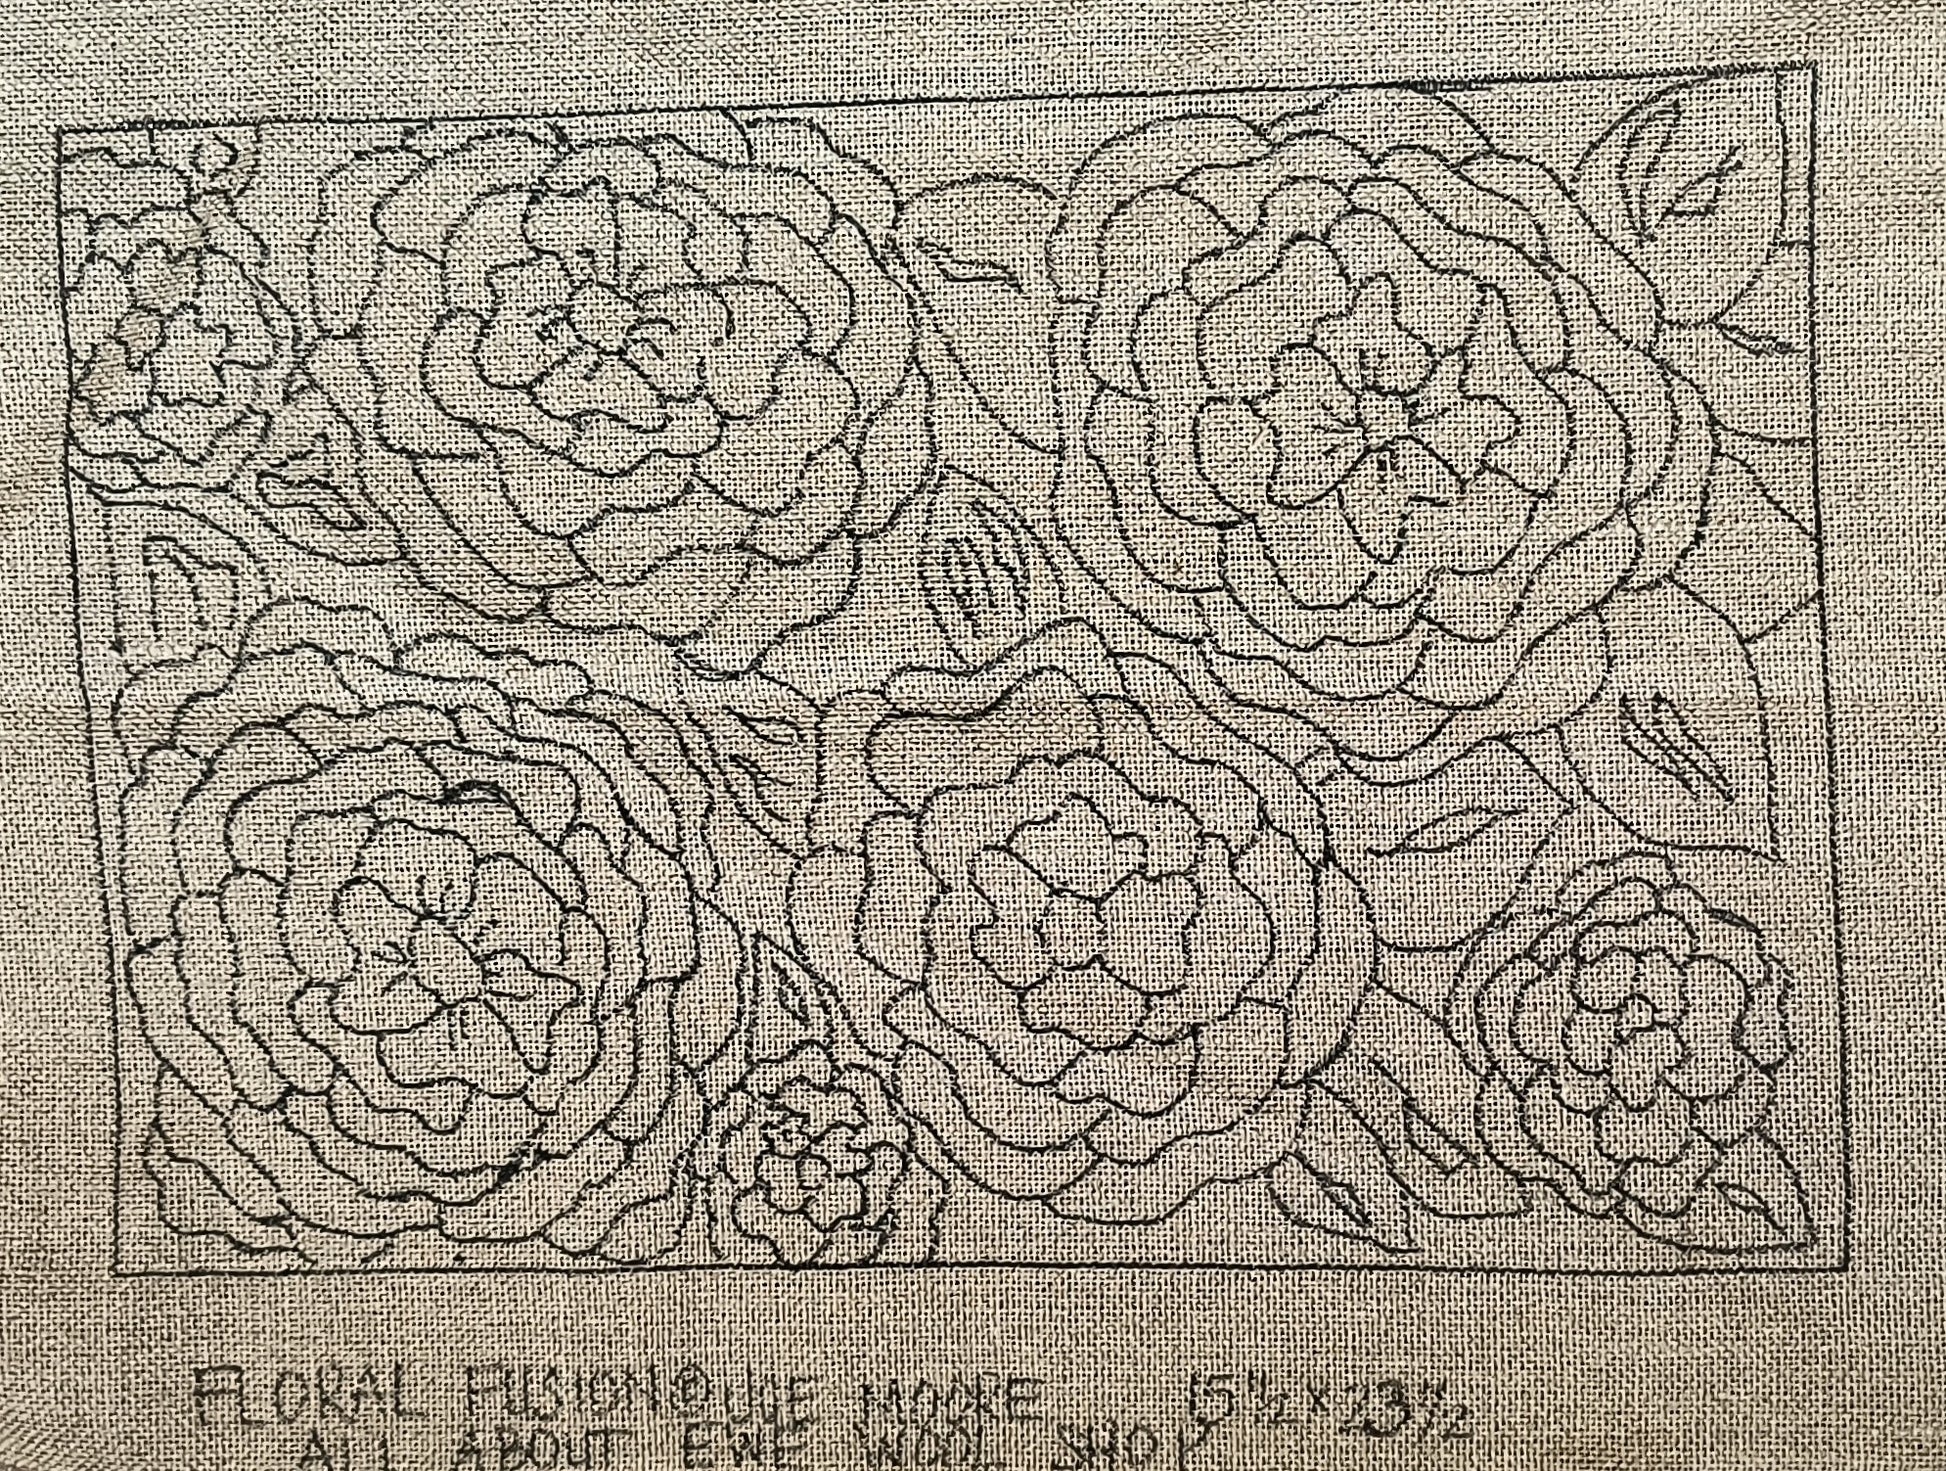 a close up of a piece of cloth with flowers on it